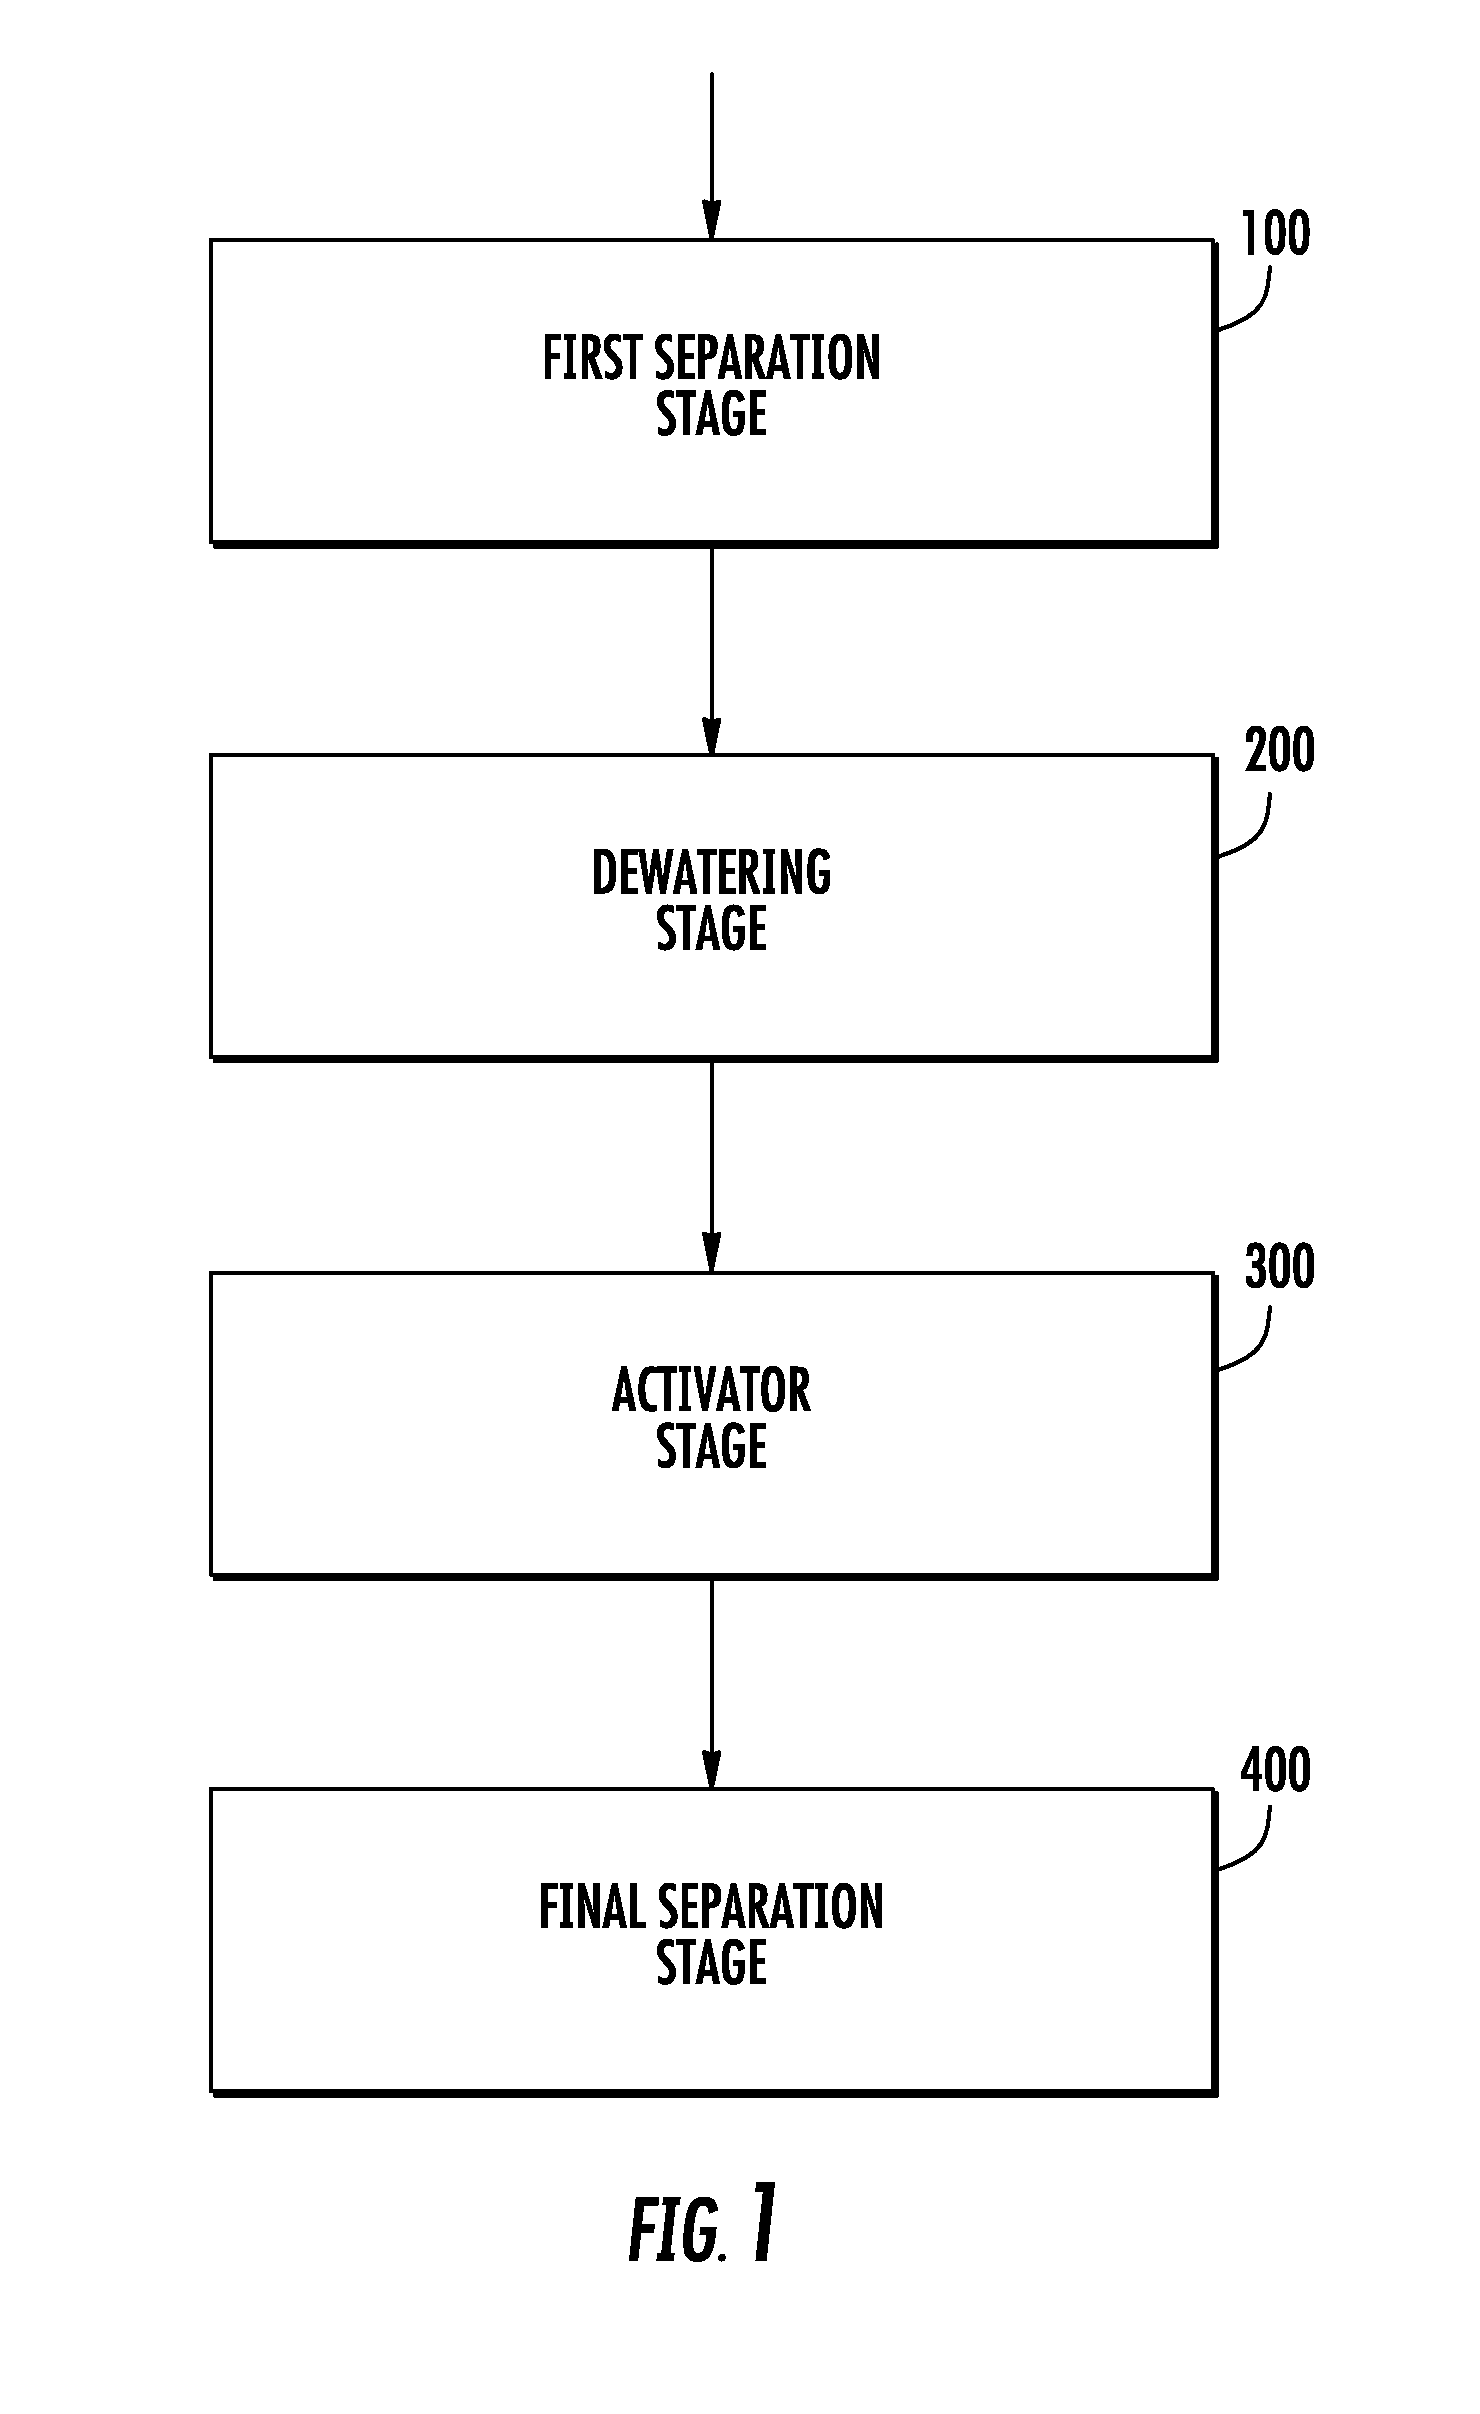 Waste separation and processing system